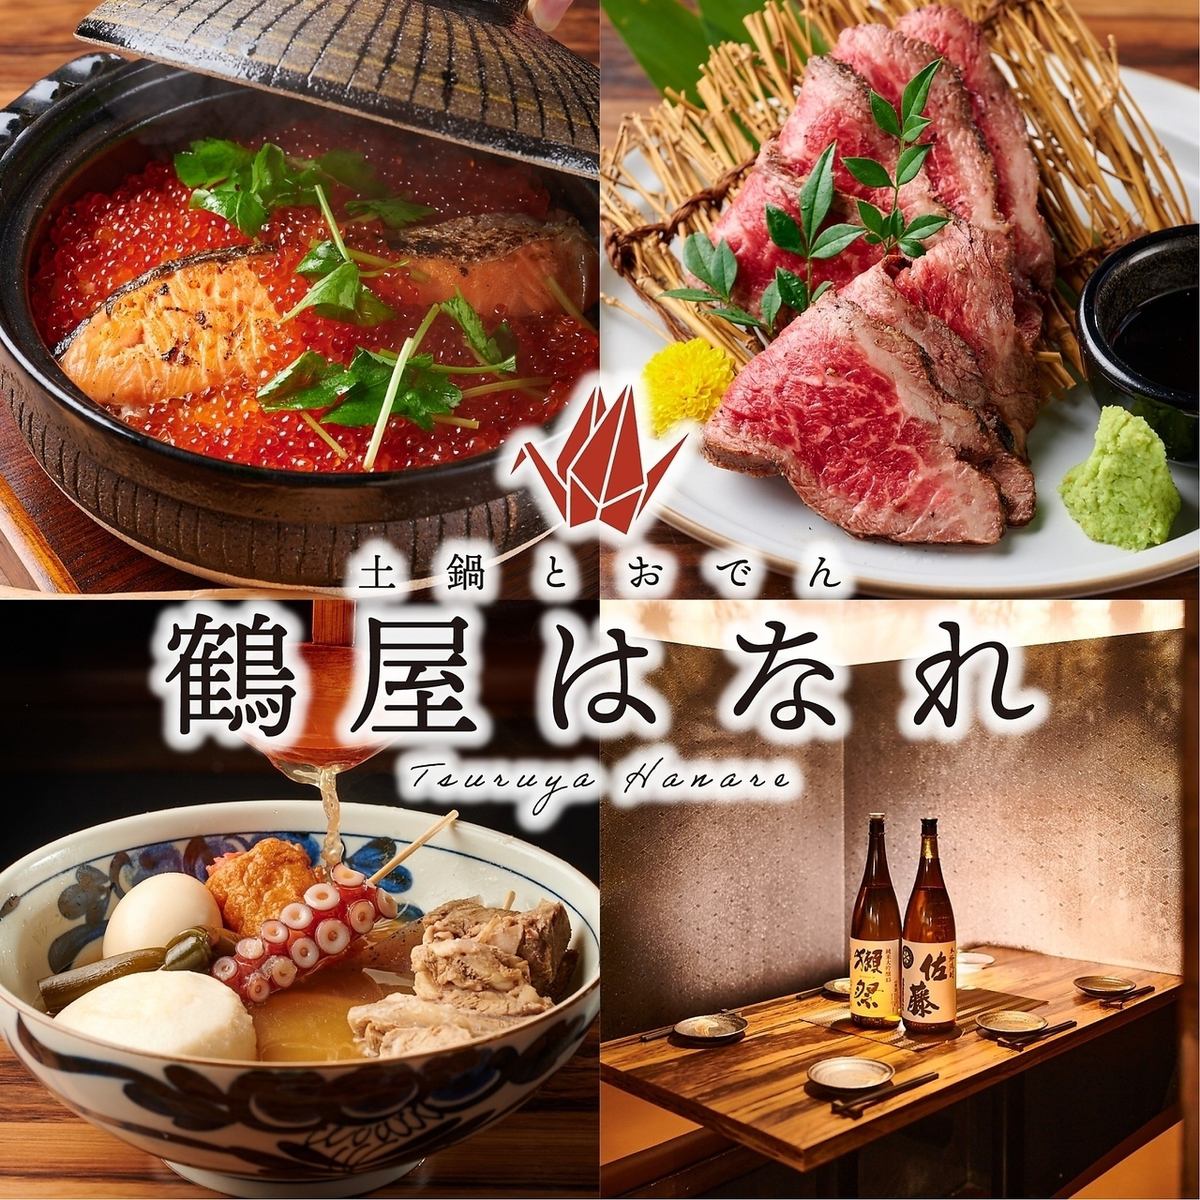 Authentic giblet hotpot, chicken sukiyaki hotpot, and Tsuruya's special flavored oden! Perfect for a banquet♪